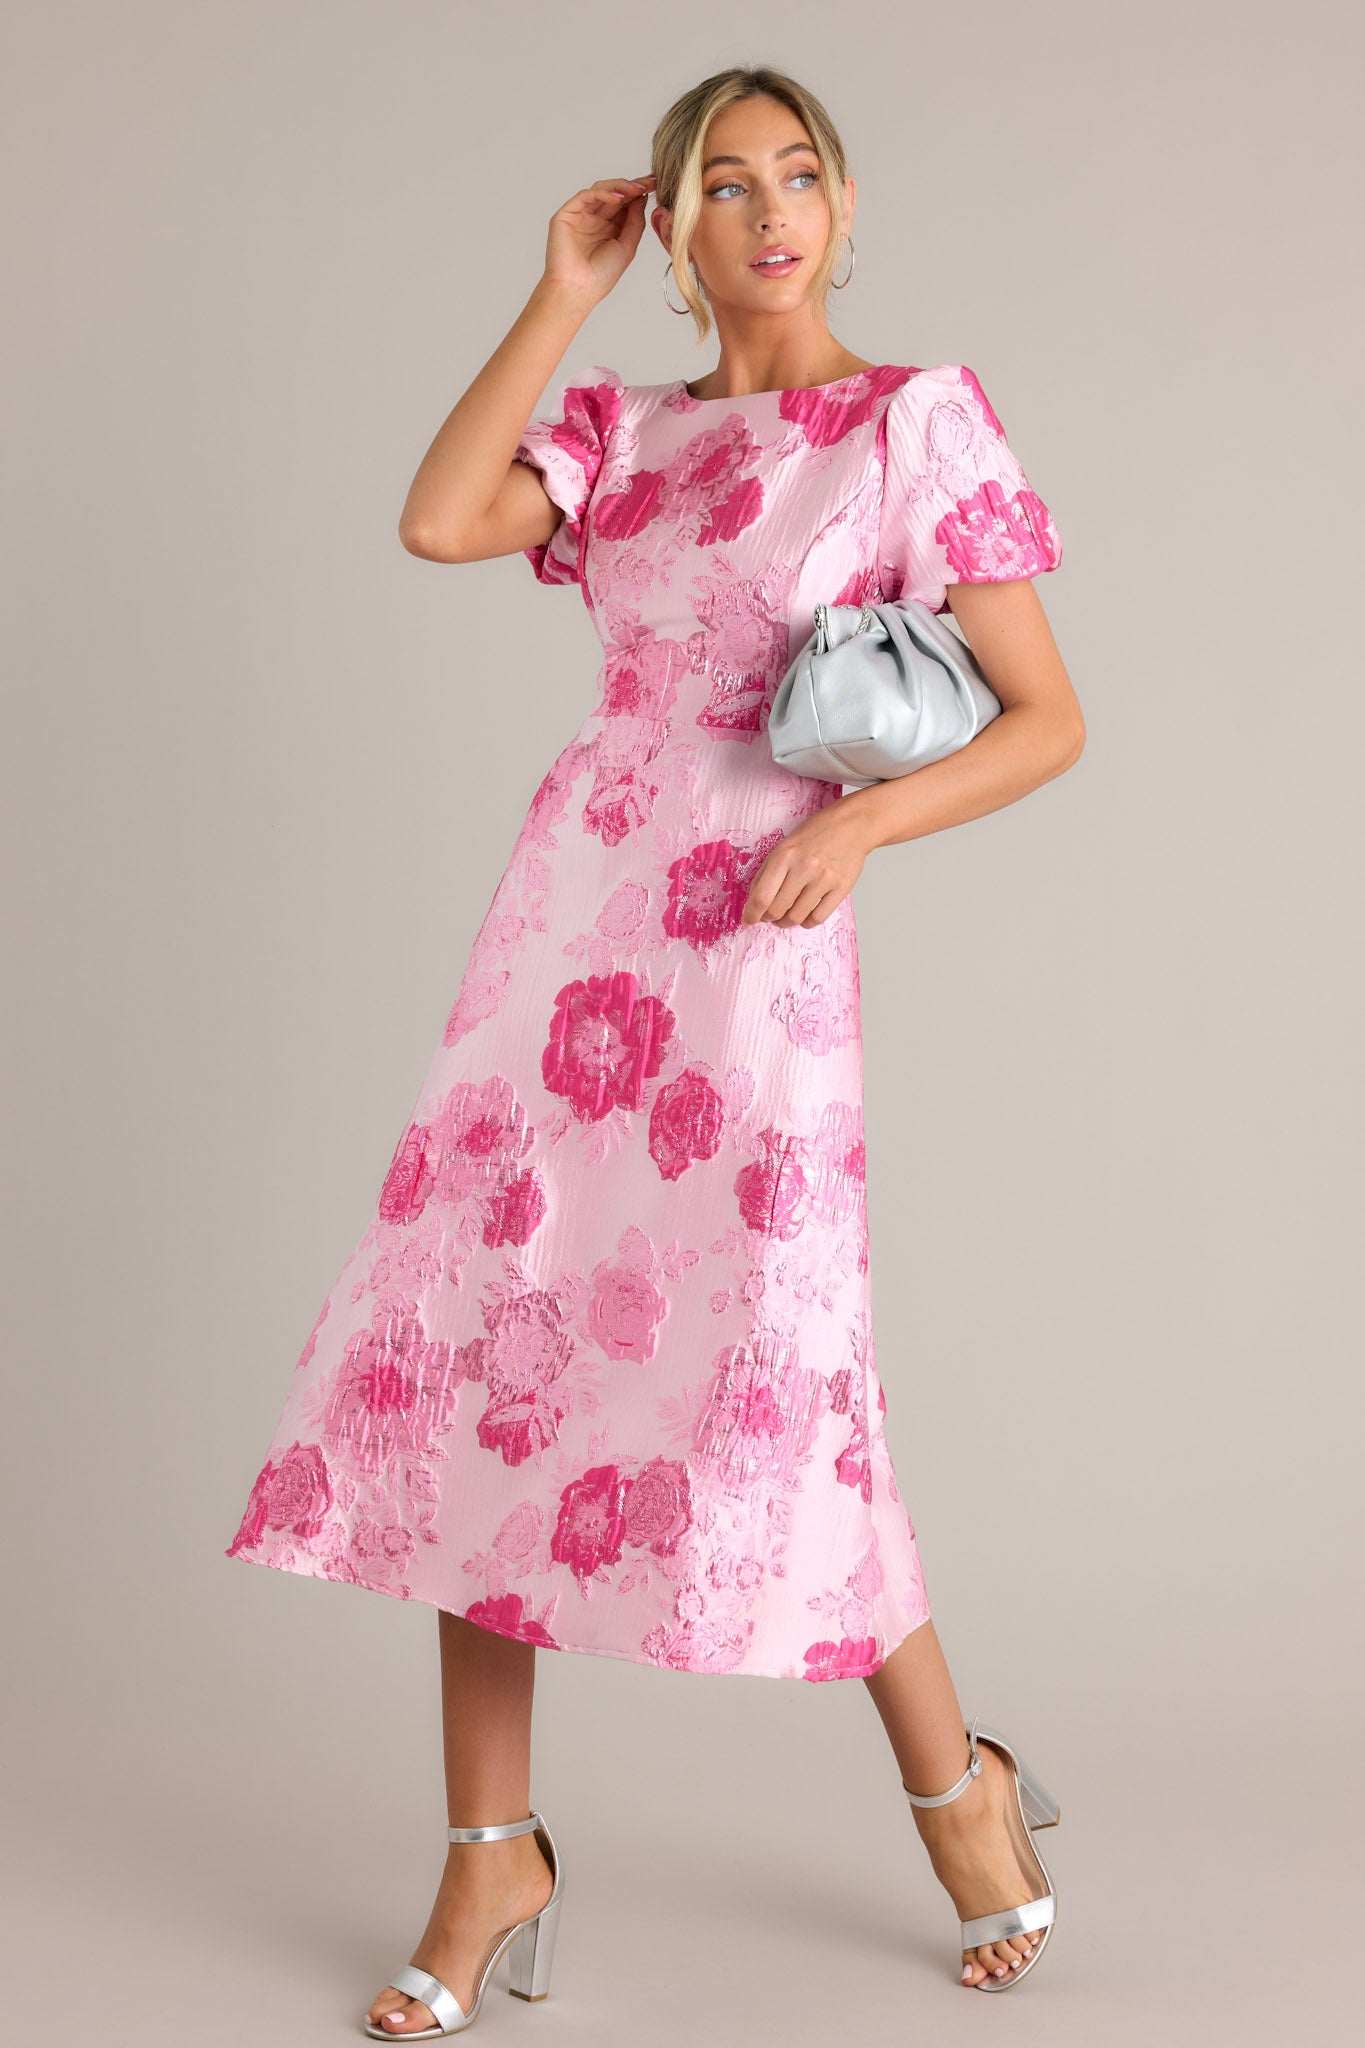 Action shot of a pink dress displaying the fit and movement, highlighting the boat neckline, short puff sleeves, deep v-back with a zipper closure, and midi length.